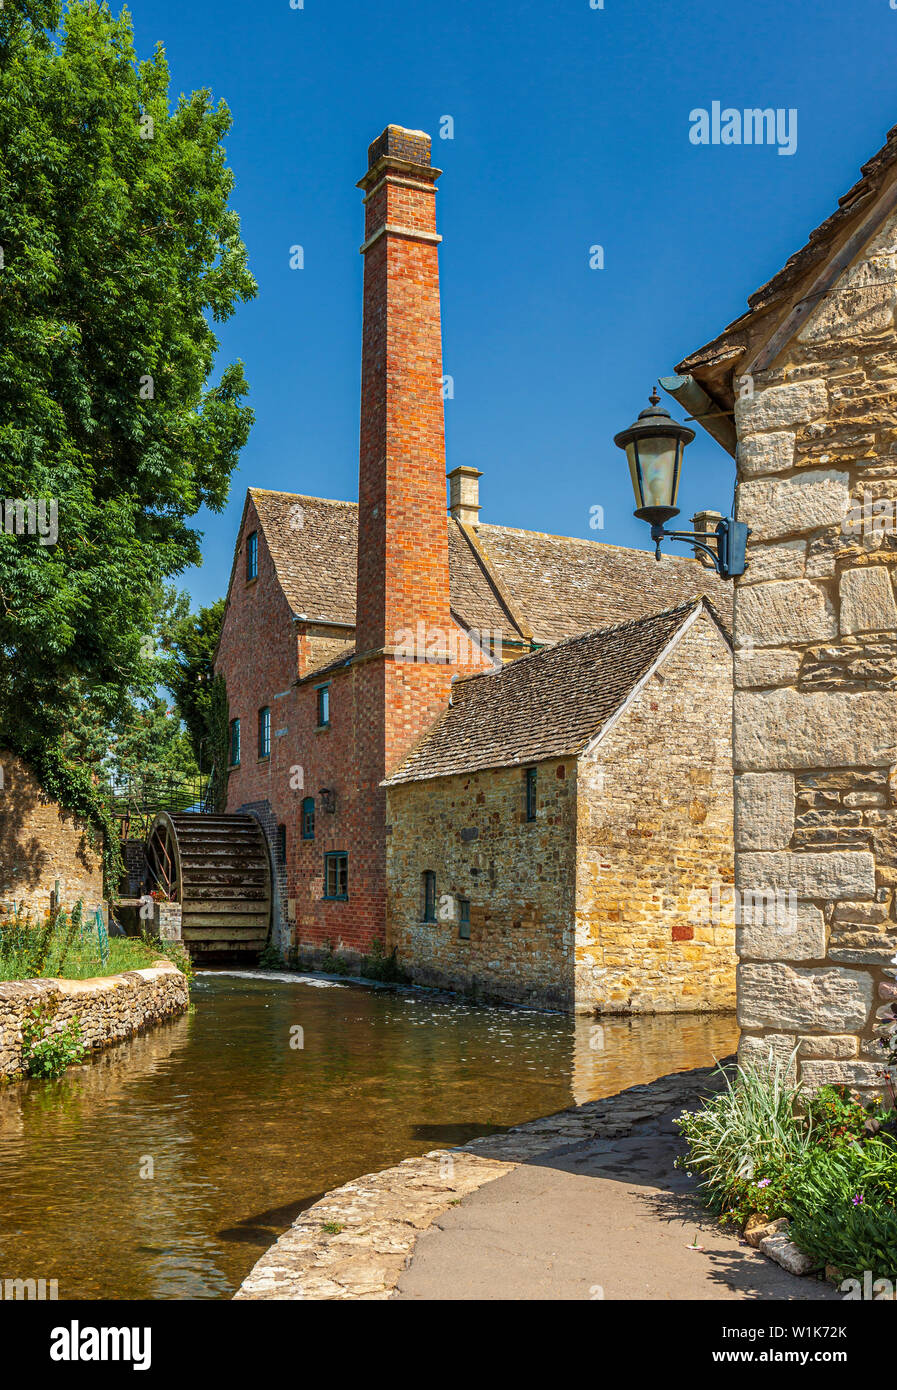 The Old Mill, Lower Slaughter. Stock Photo